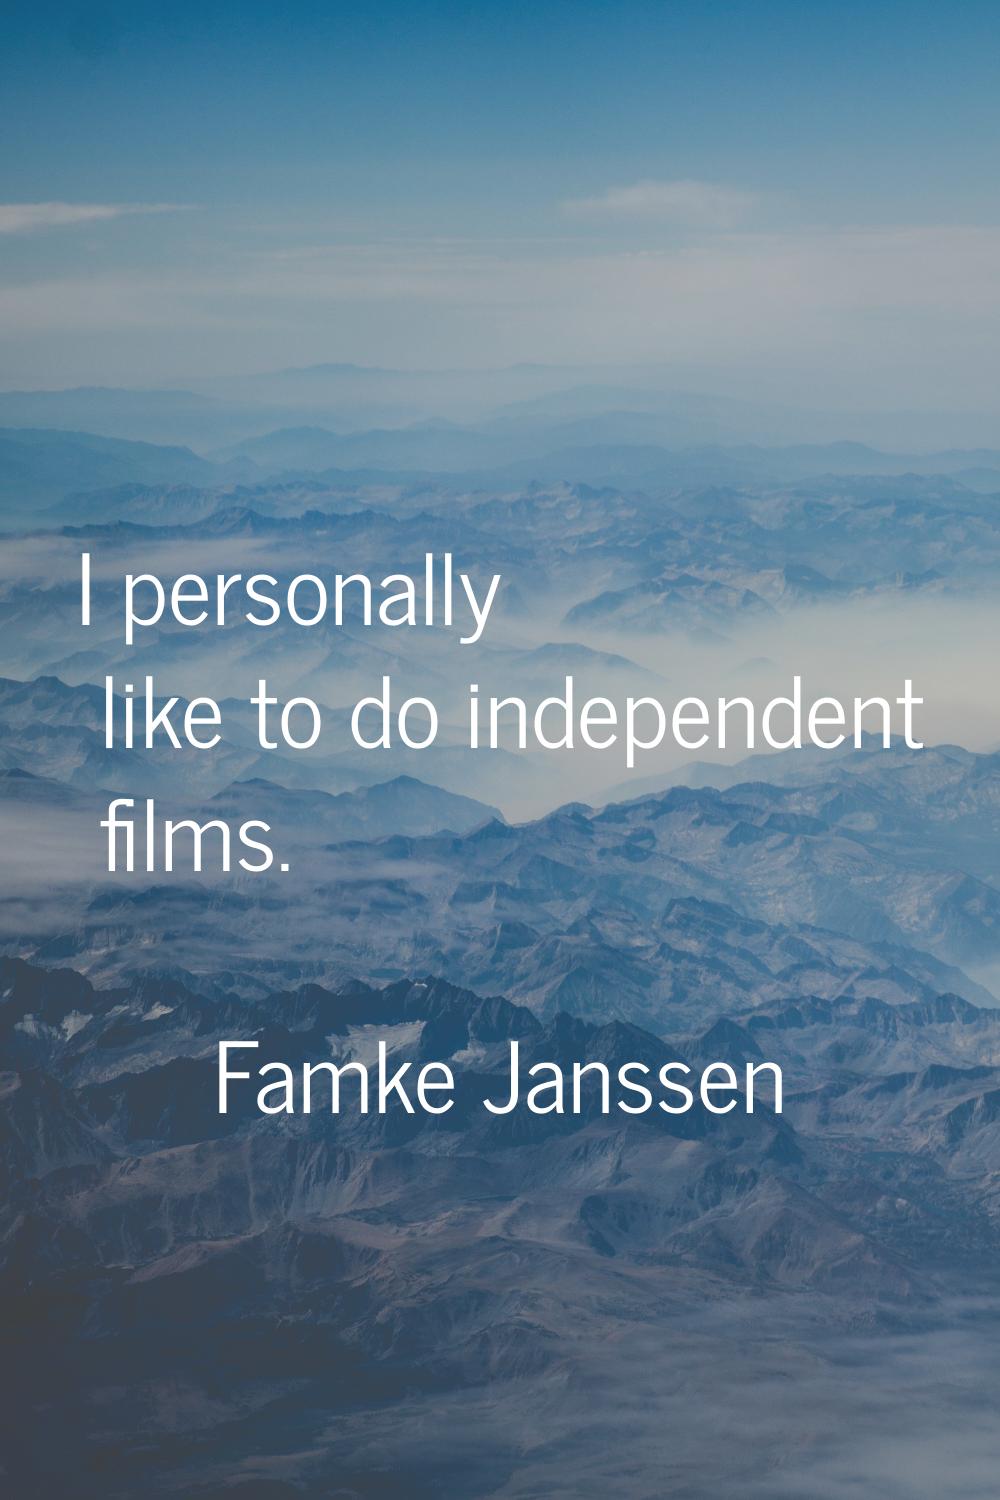 I personally like to do independent films.